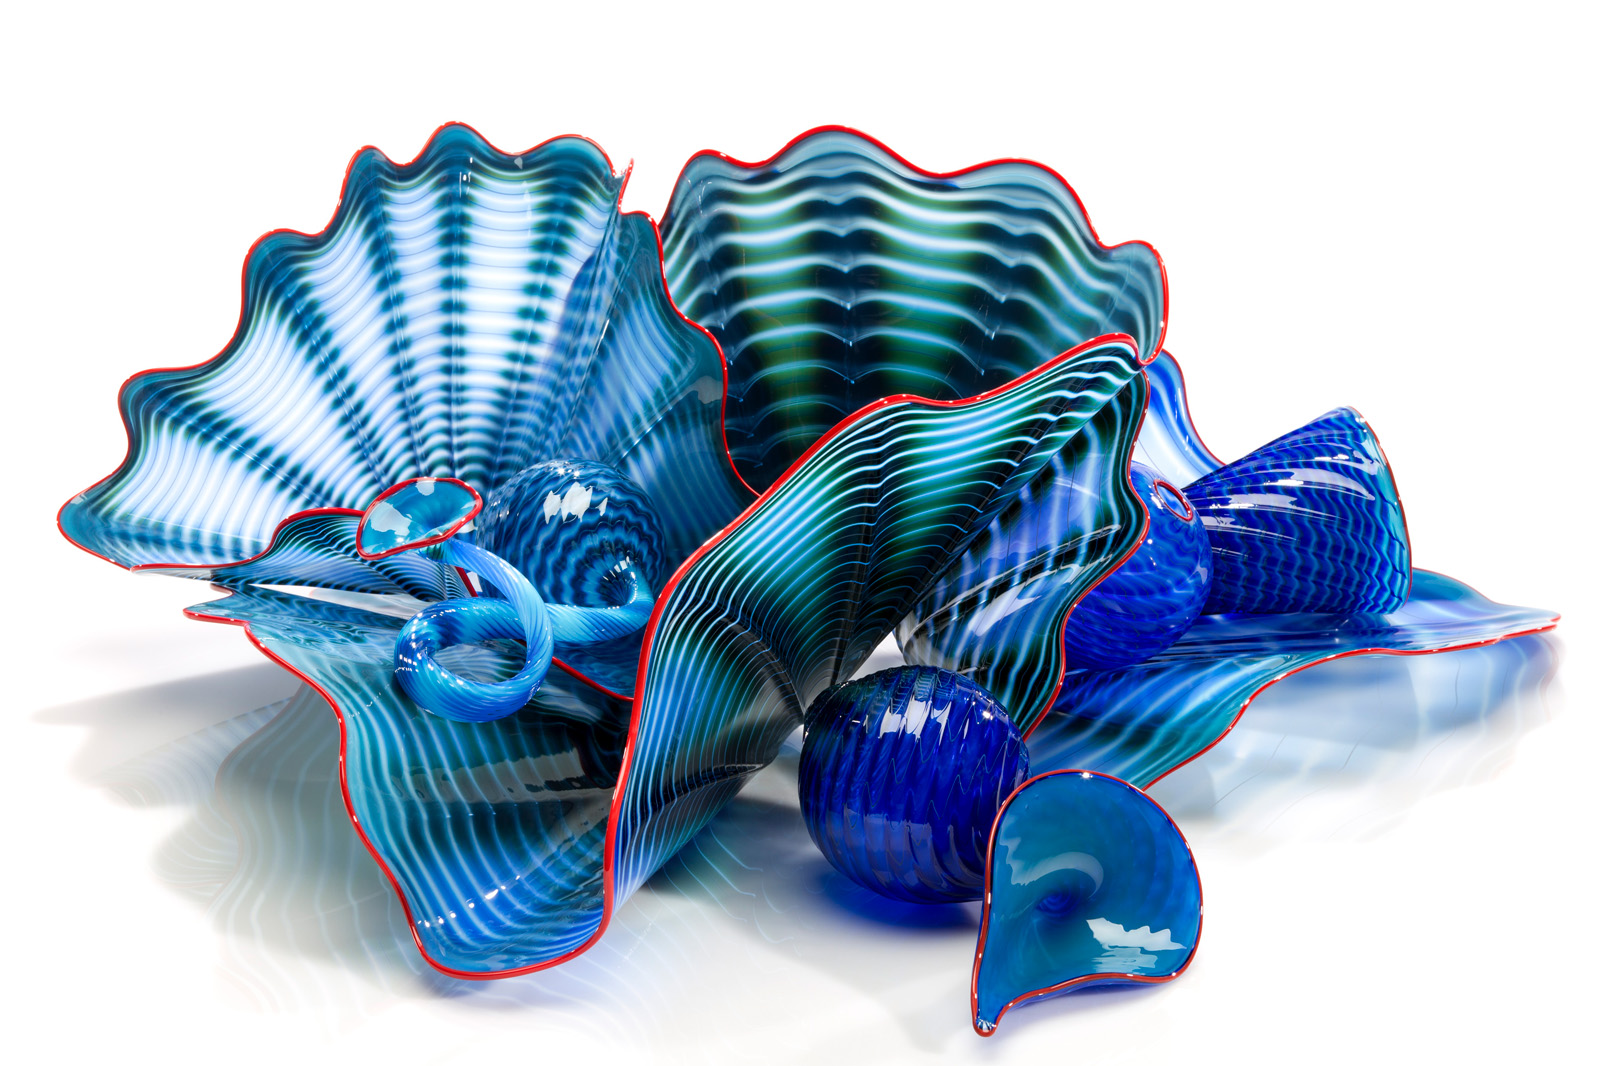 Niagara Blue Persian Set with Carmine Lip Wraps, 2016 by Dale Chihuly